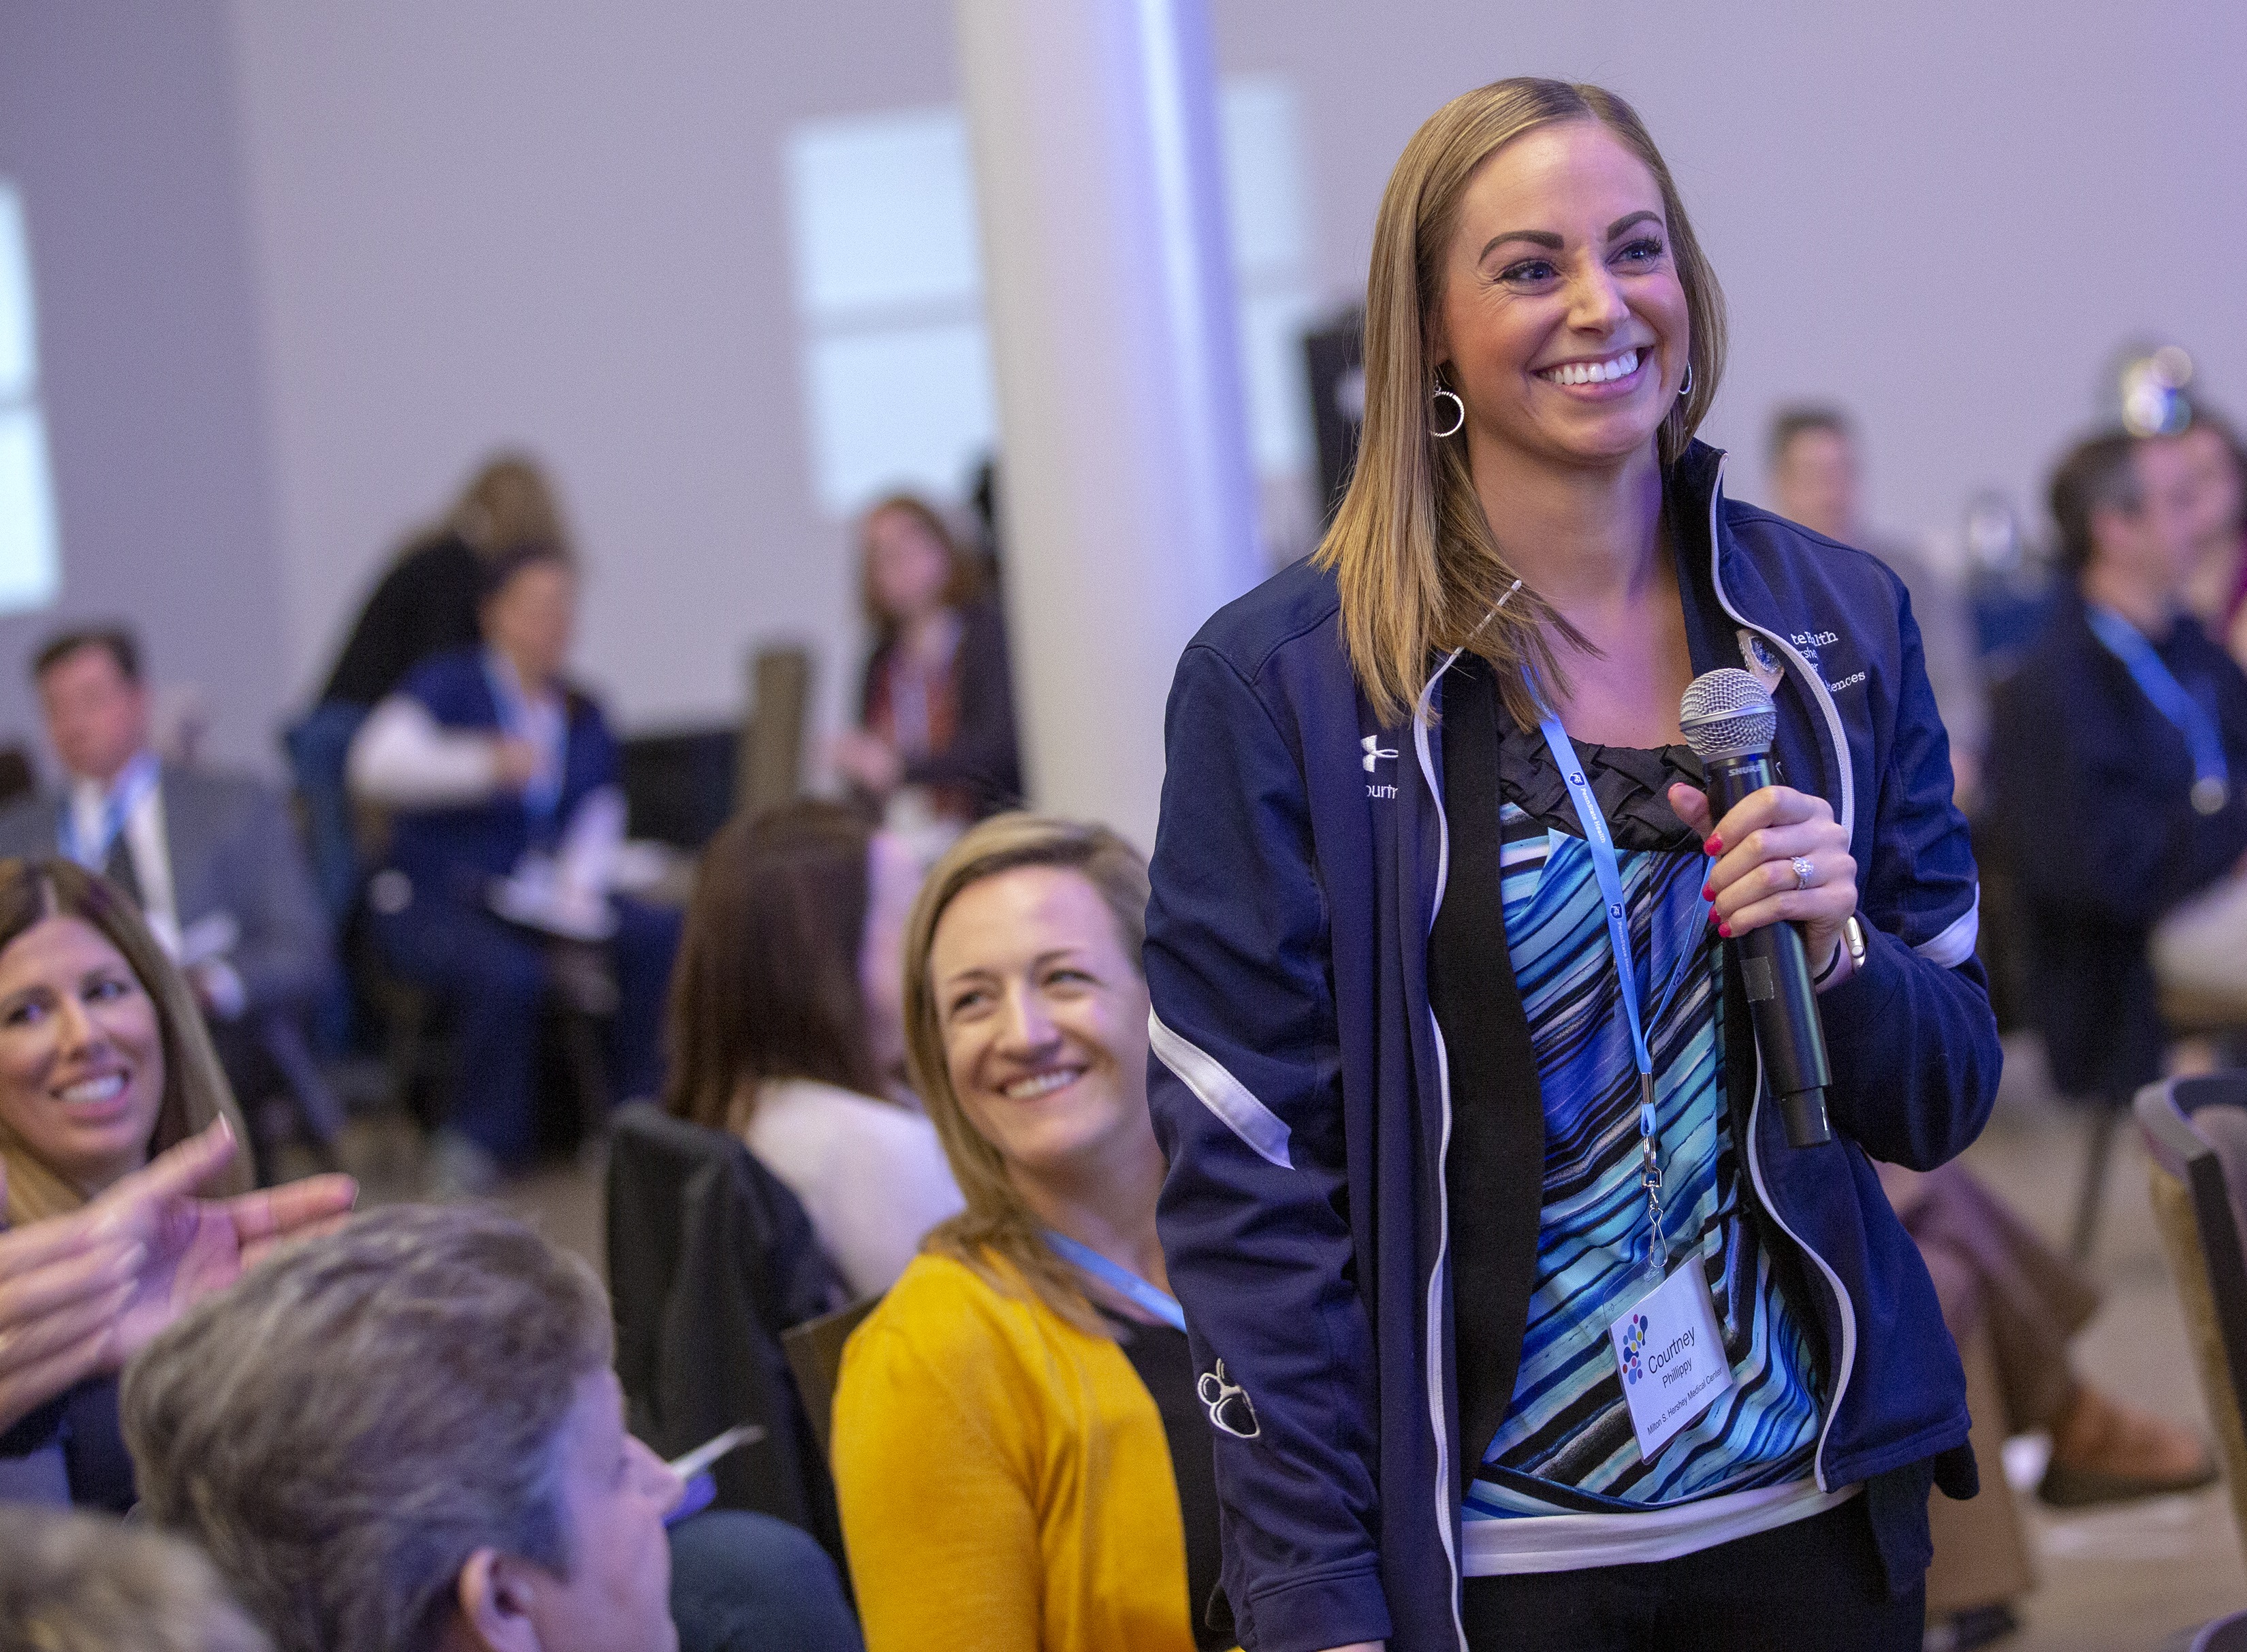 Courtney Phillippy, a woman with long, blonde hair, stands with a microphone in her hand and smiles during a small group session at the 2019 Leadership Conference: This is Penn State Health. She is wearing a Penn State jacket and a striped top. Behind her other employees smile or look to the side. A large steel column is behind her.